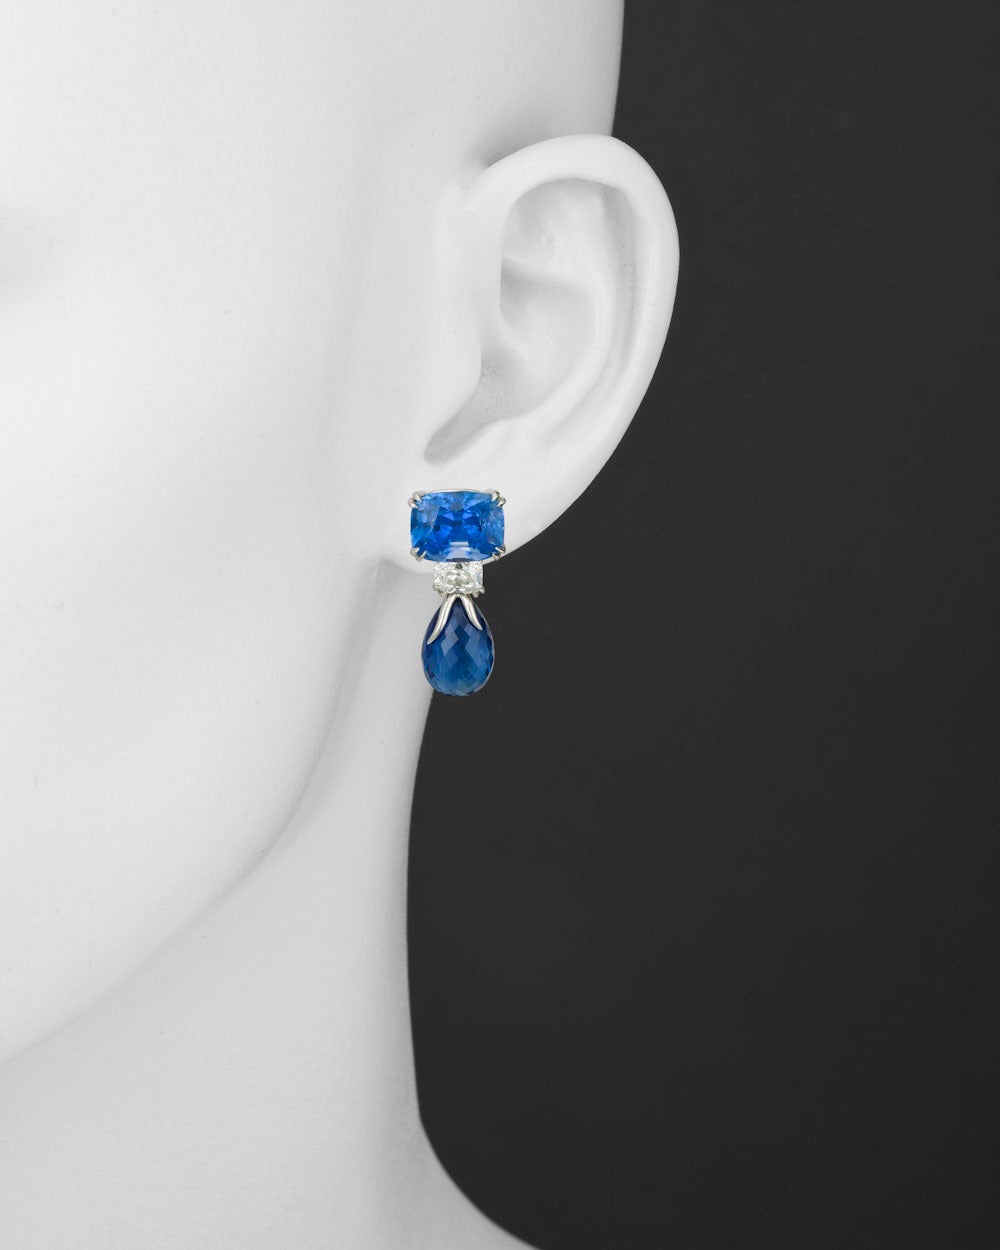 Sapphire and diamond short pendant earrings, designed as a larger cushion-cut sapphire atop a smaller cushion-cut diamond to a pear-shaped briollette-cut diamond pendant, the four sapphires weighing approximately 27.18 total carats and two diamonds